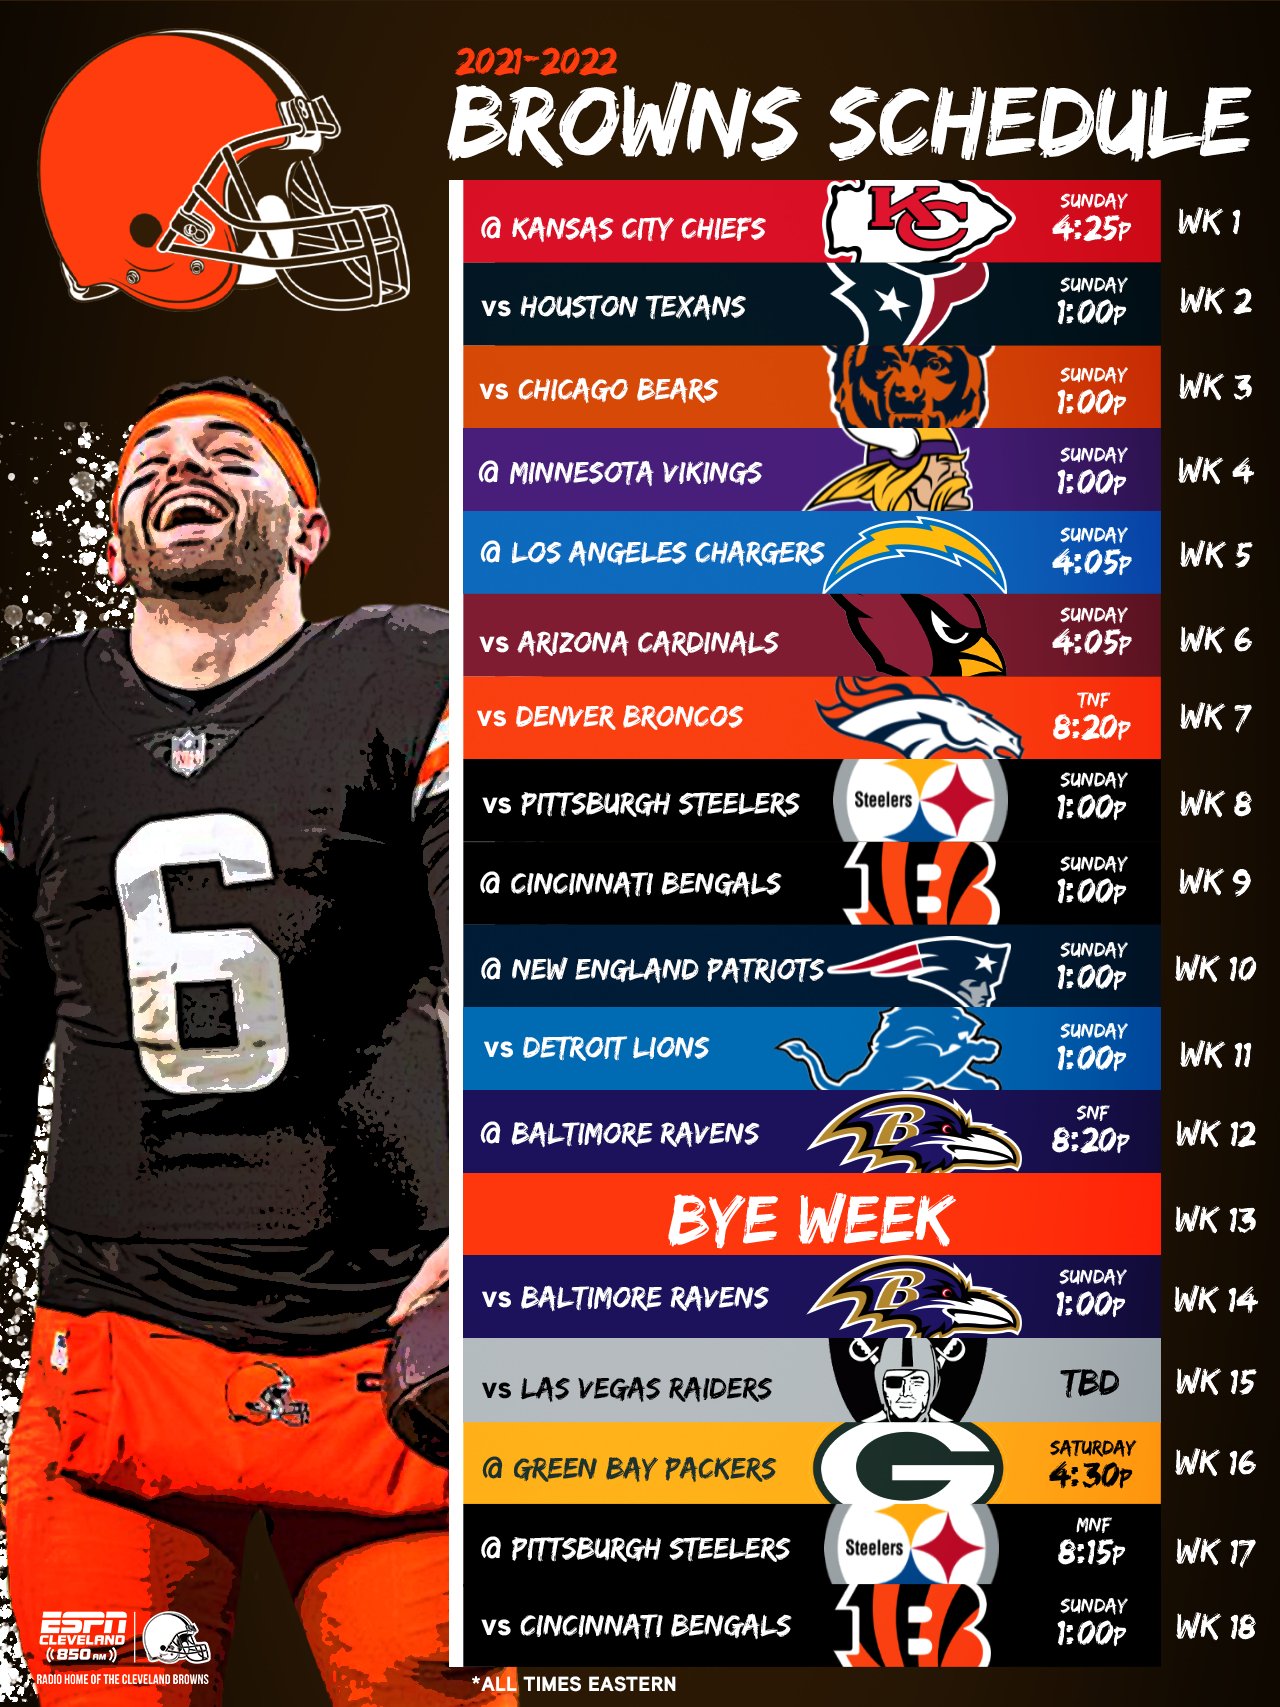 cleveland browns home schedule 2022